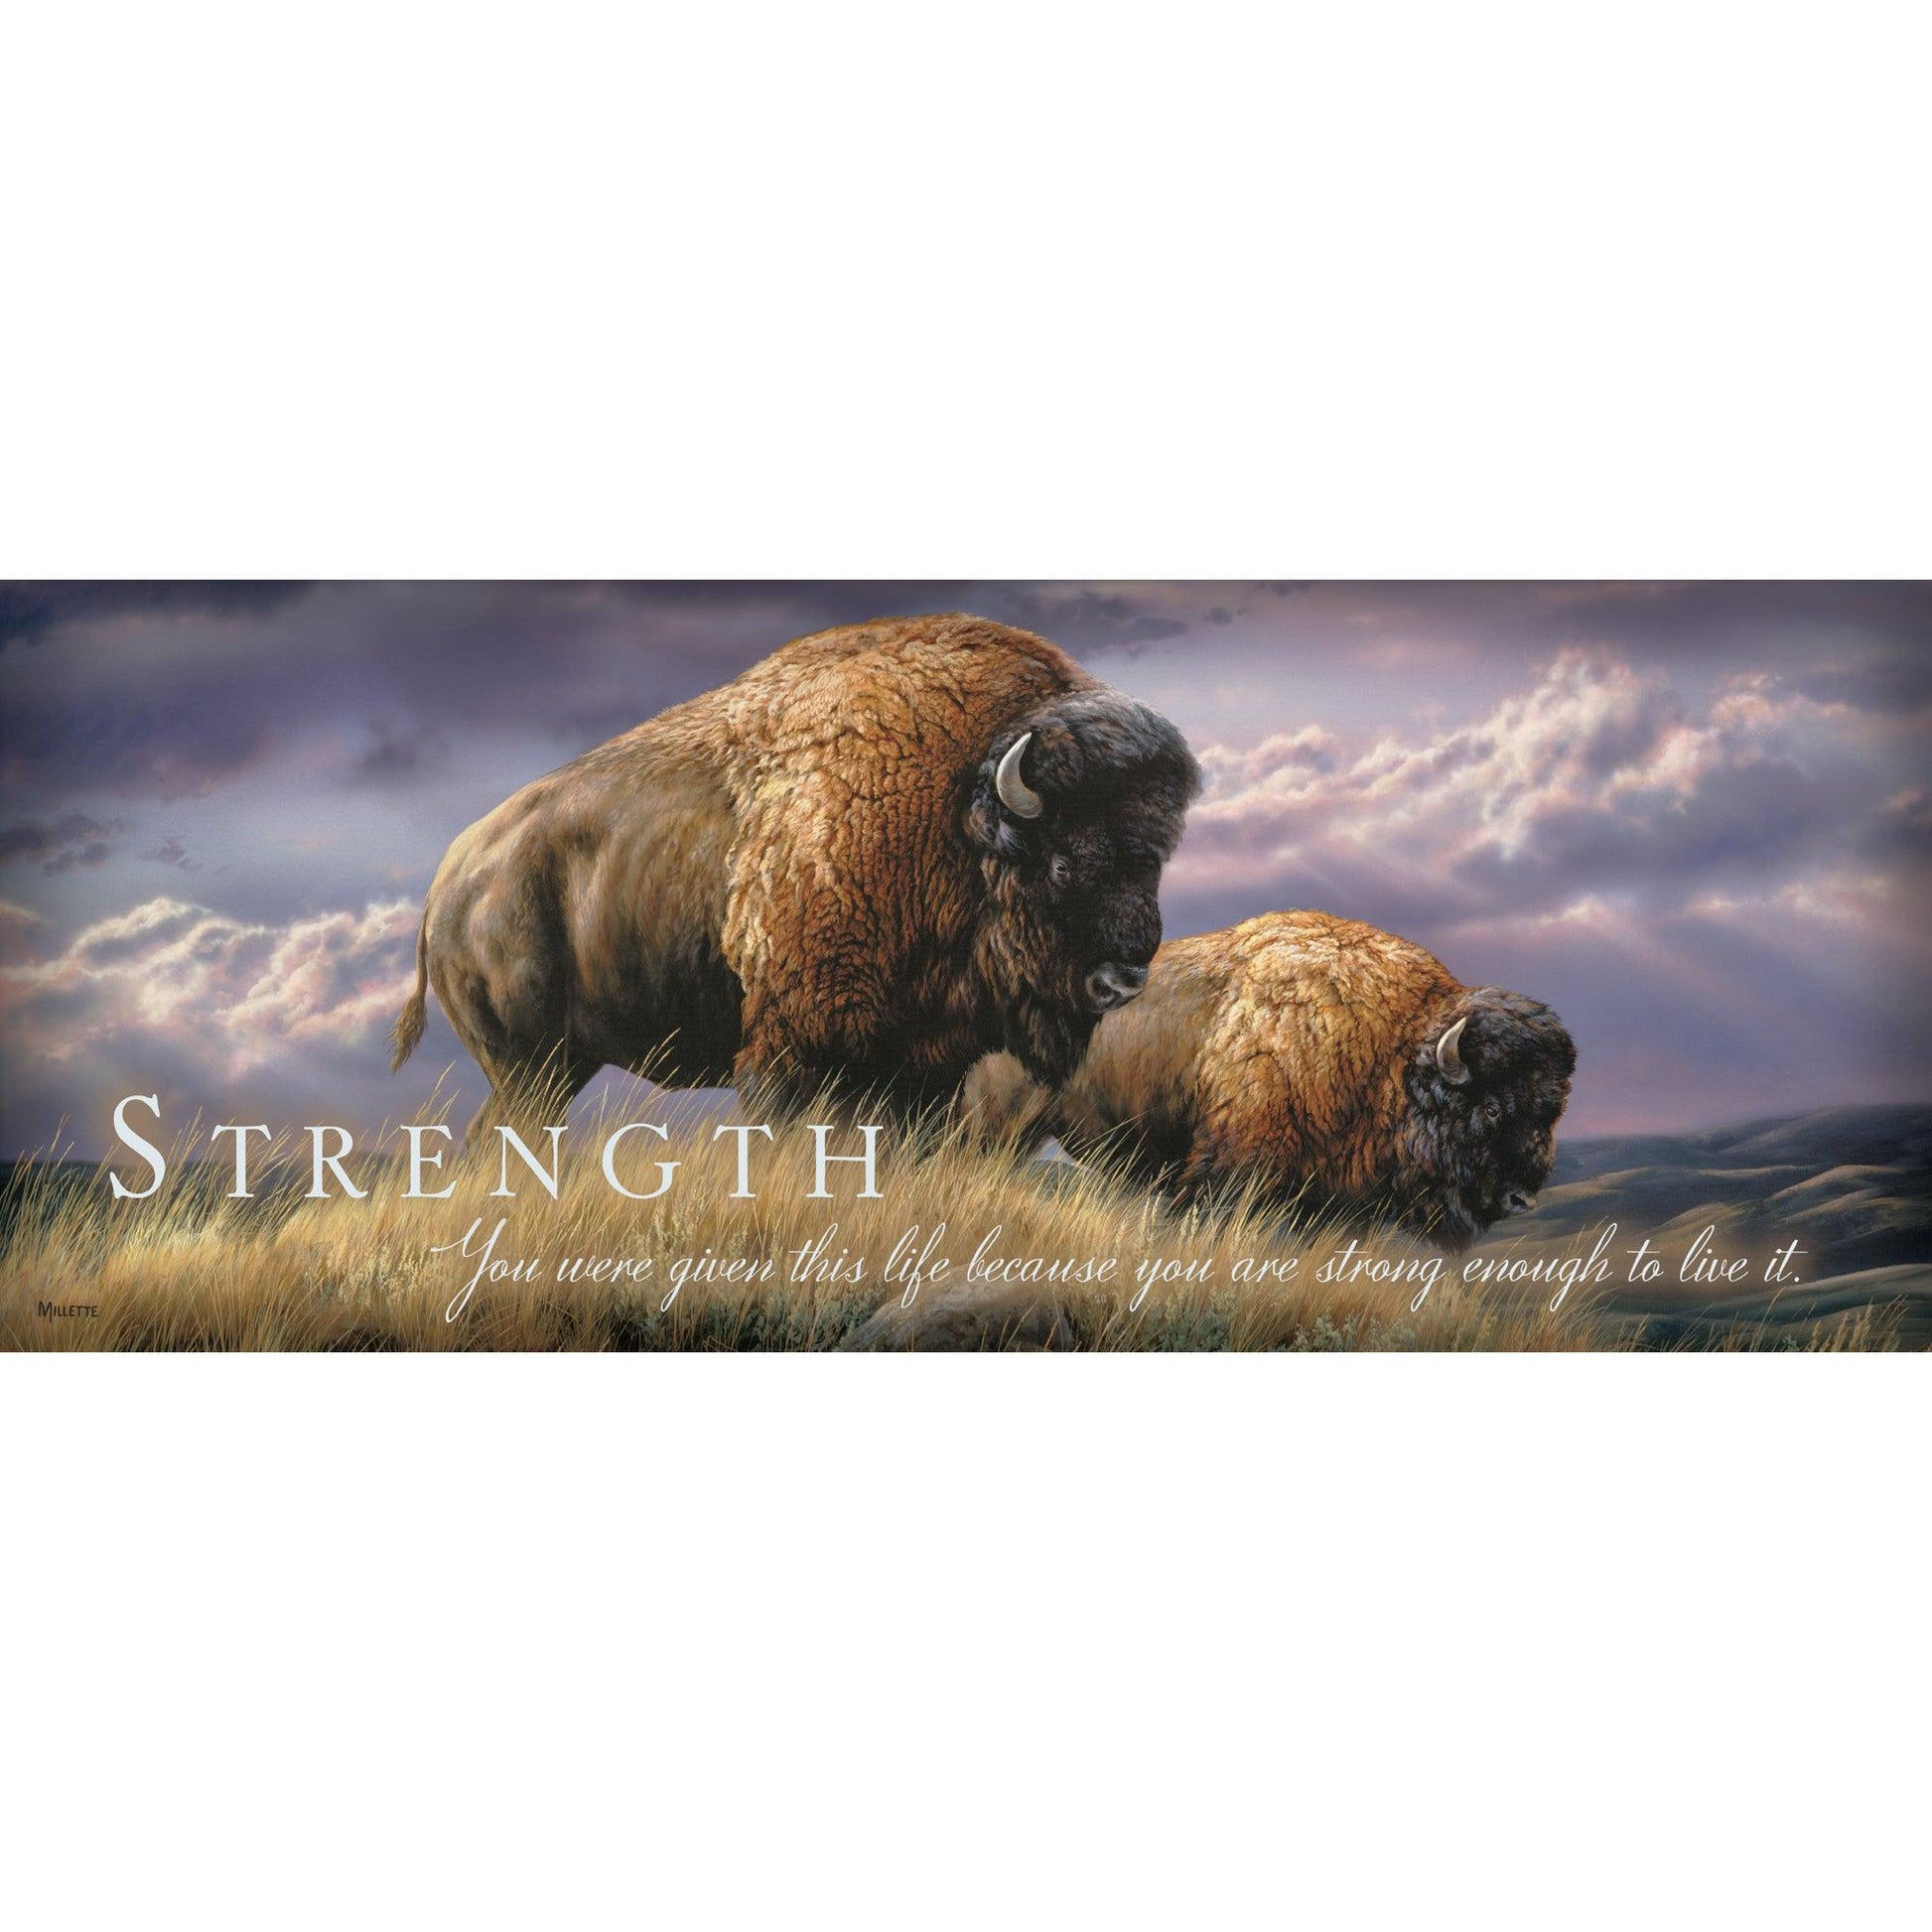 Strength - Bison 12" x 30" Wood Sign - Wild Wings